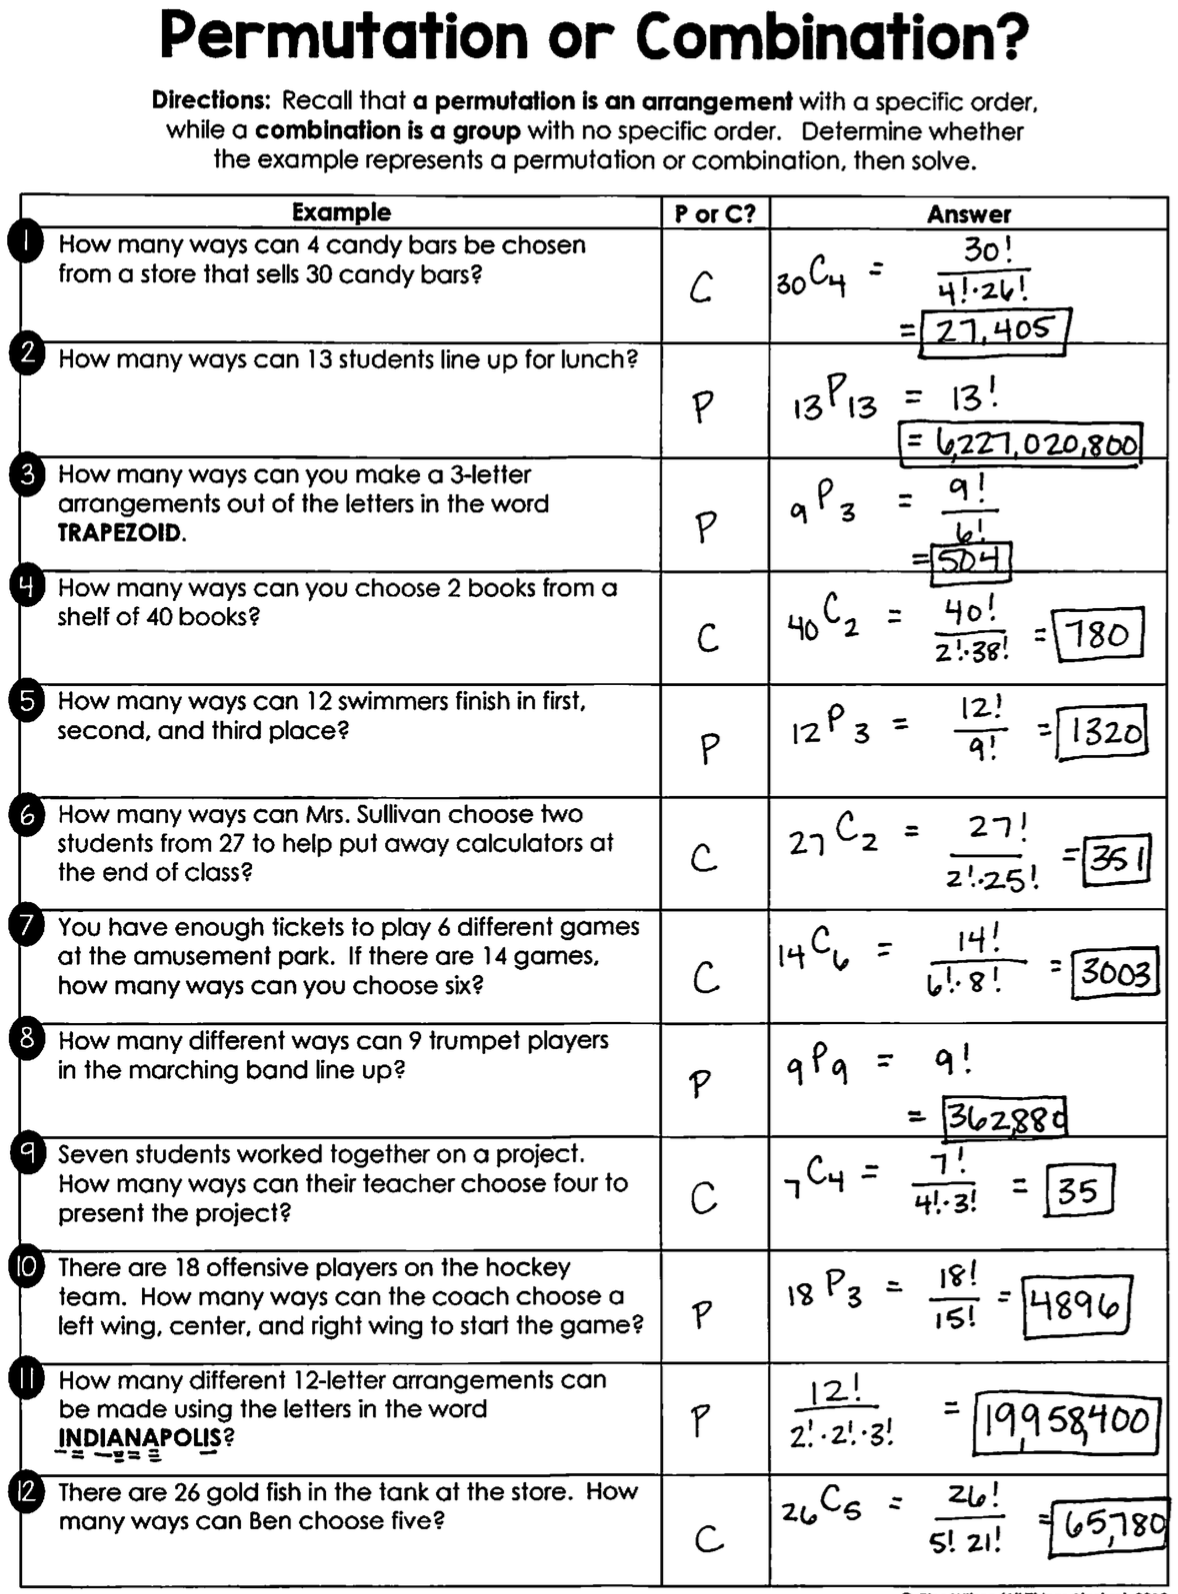 Permutations And Combinations Worksheet Answers - Worksheet List Intended For Permutations And Combinations Worksheet